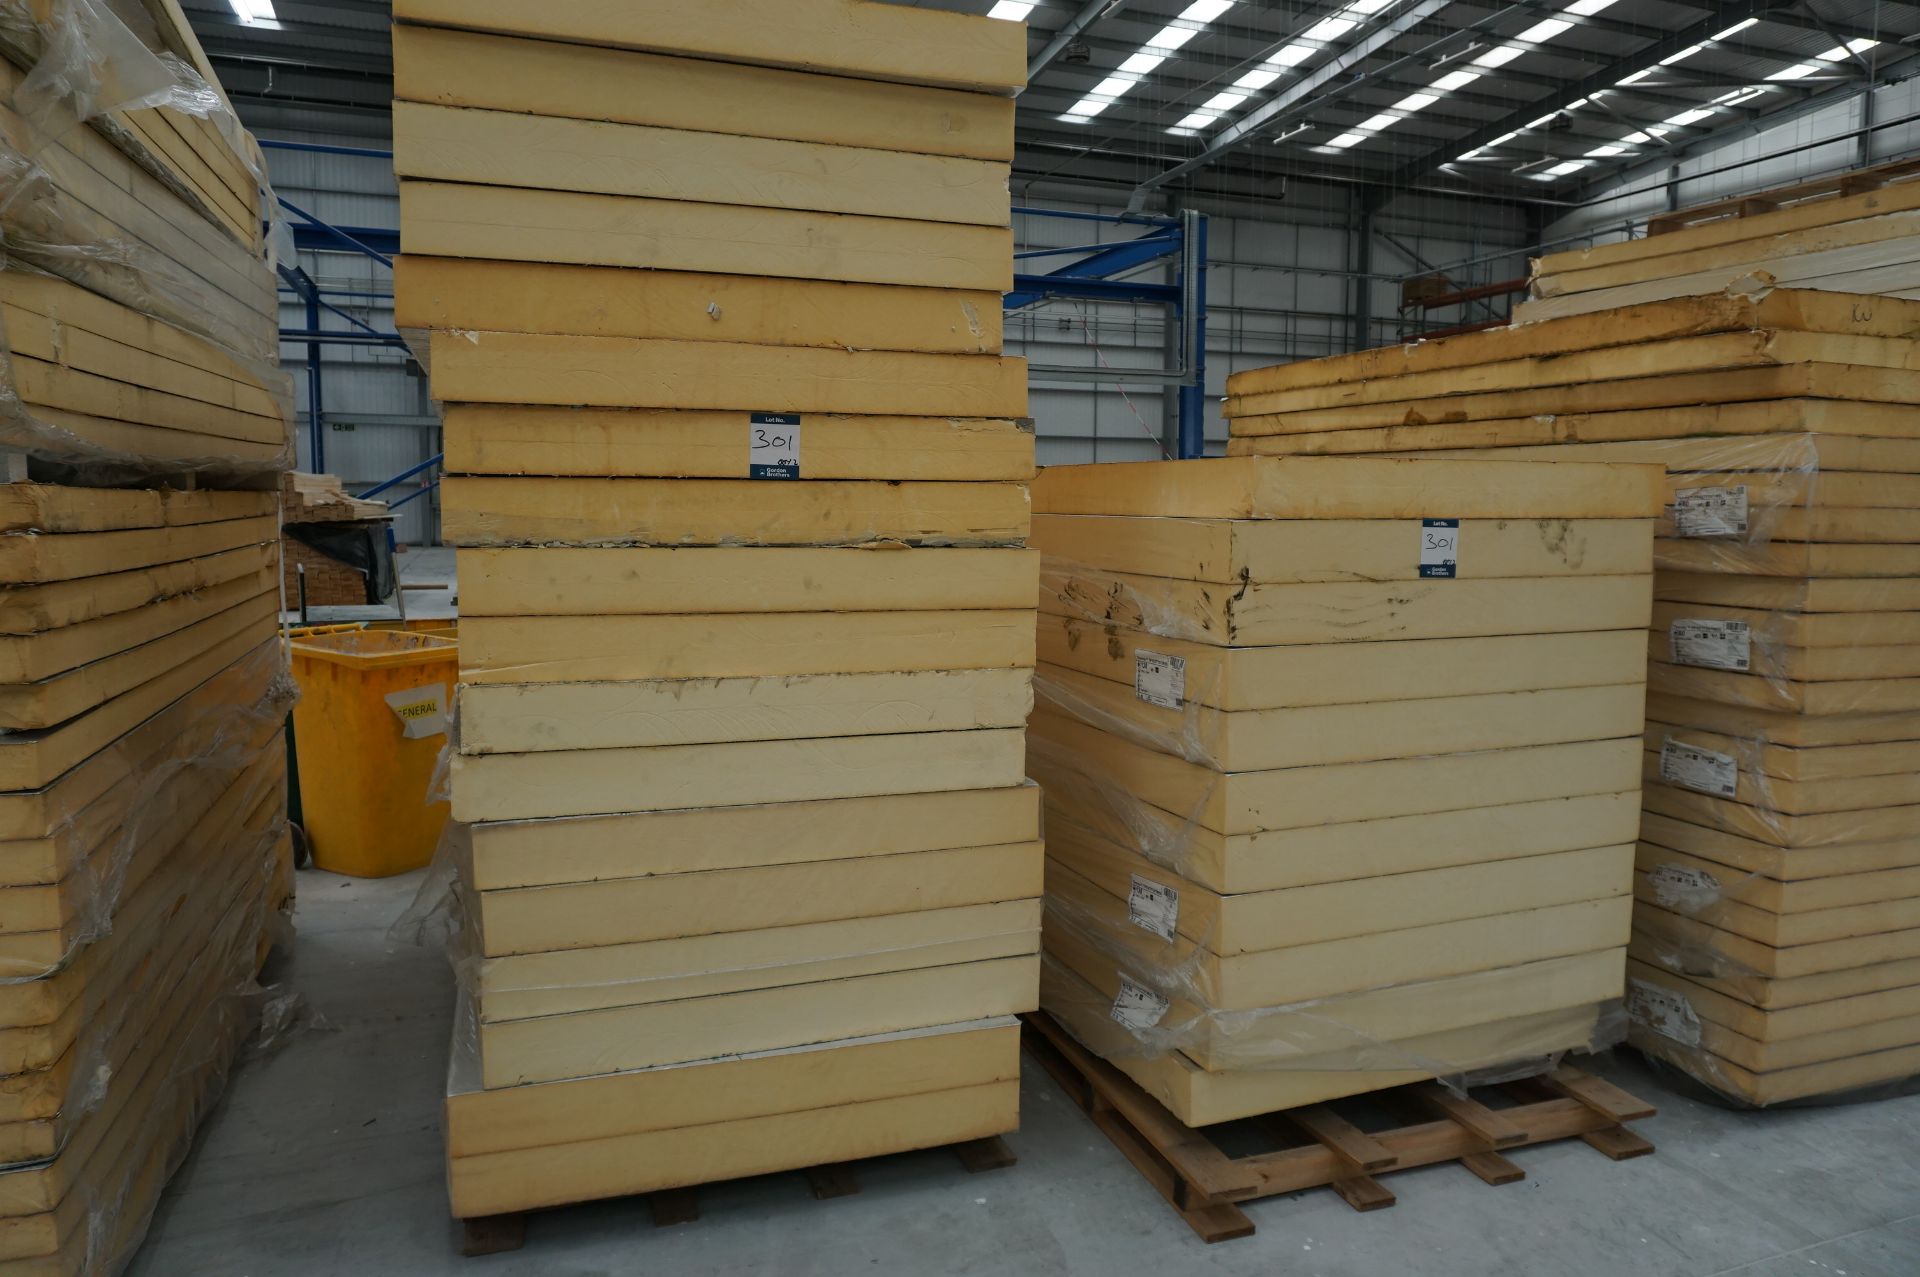 28x (no.) Kingspan, Therma TP10 insulation boards, 1200 x 2400 x 130mm